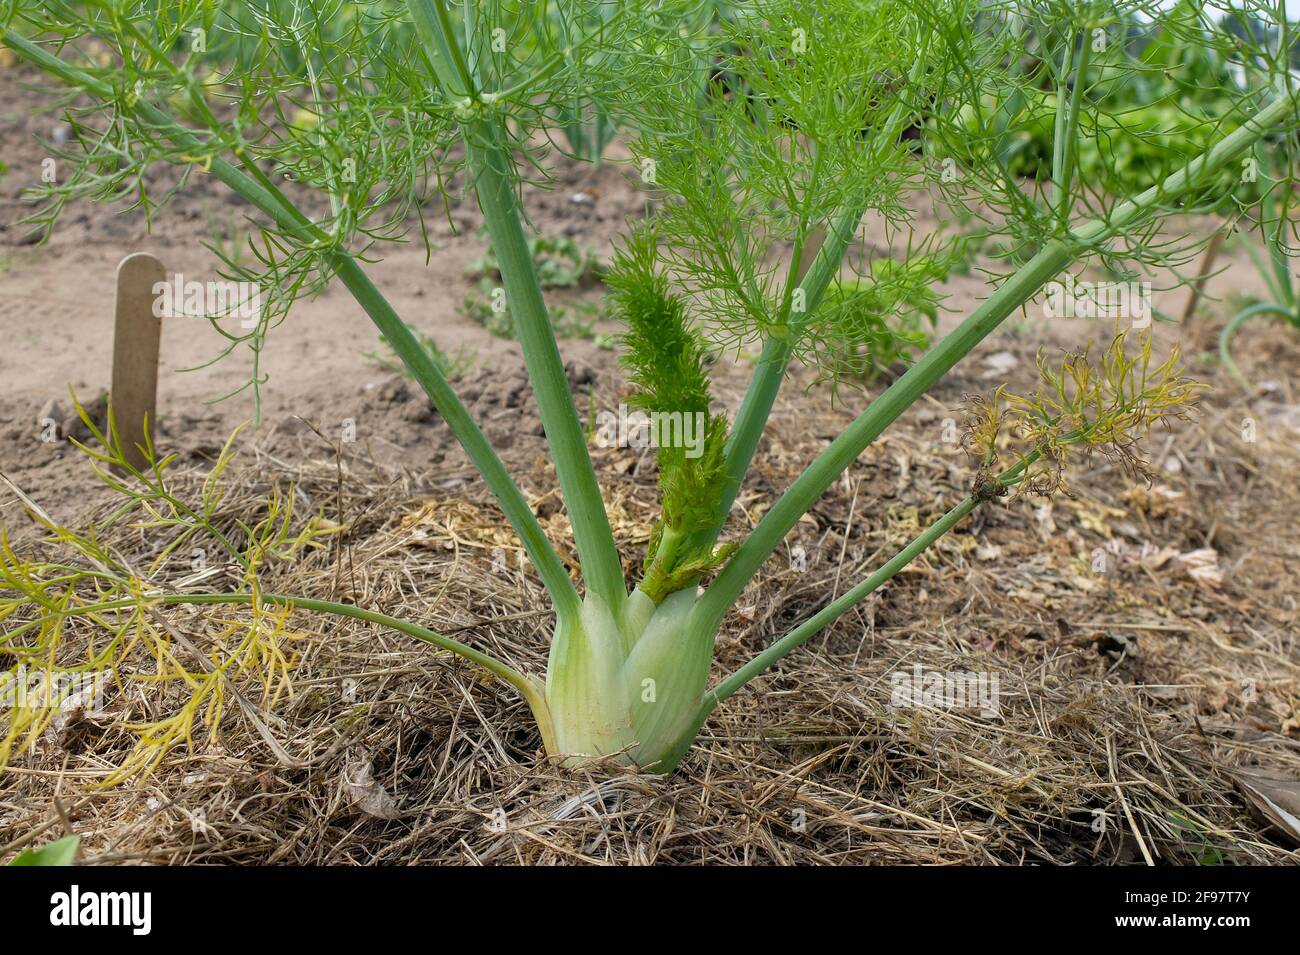 Mulch fennel (Foeniculum vulgare) with grass clippings Stock Photo